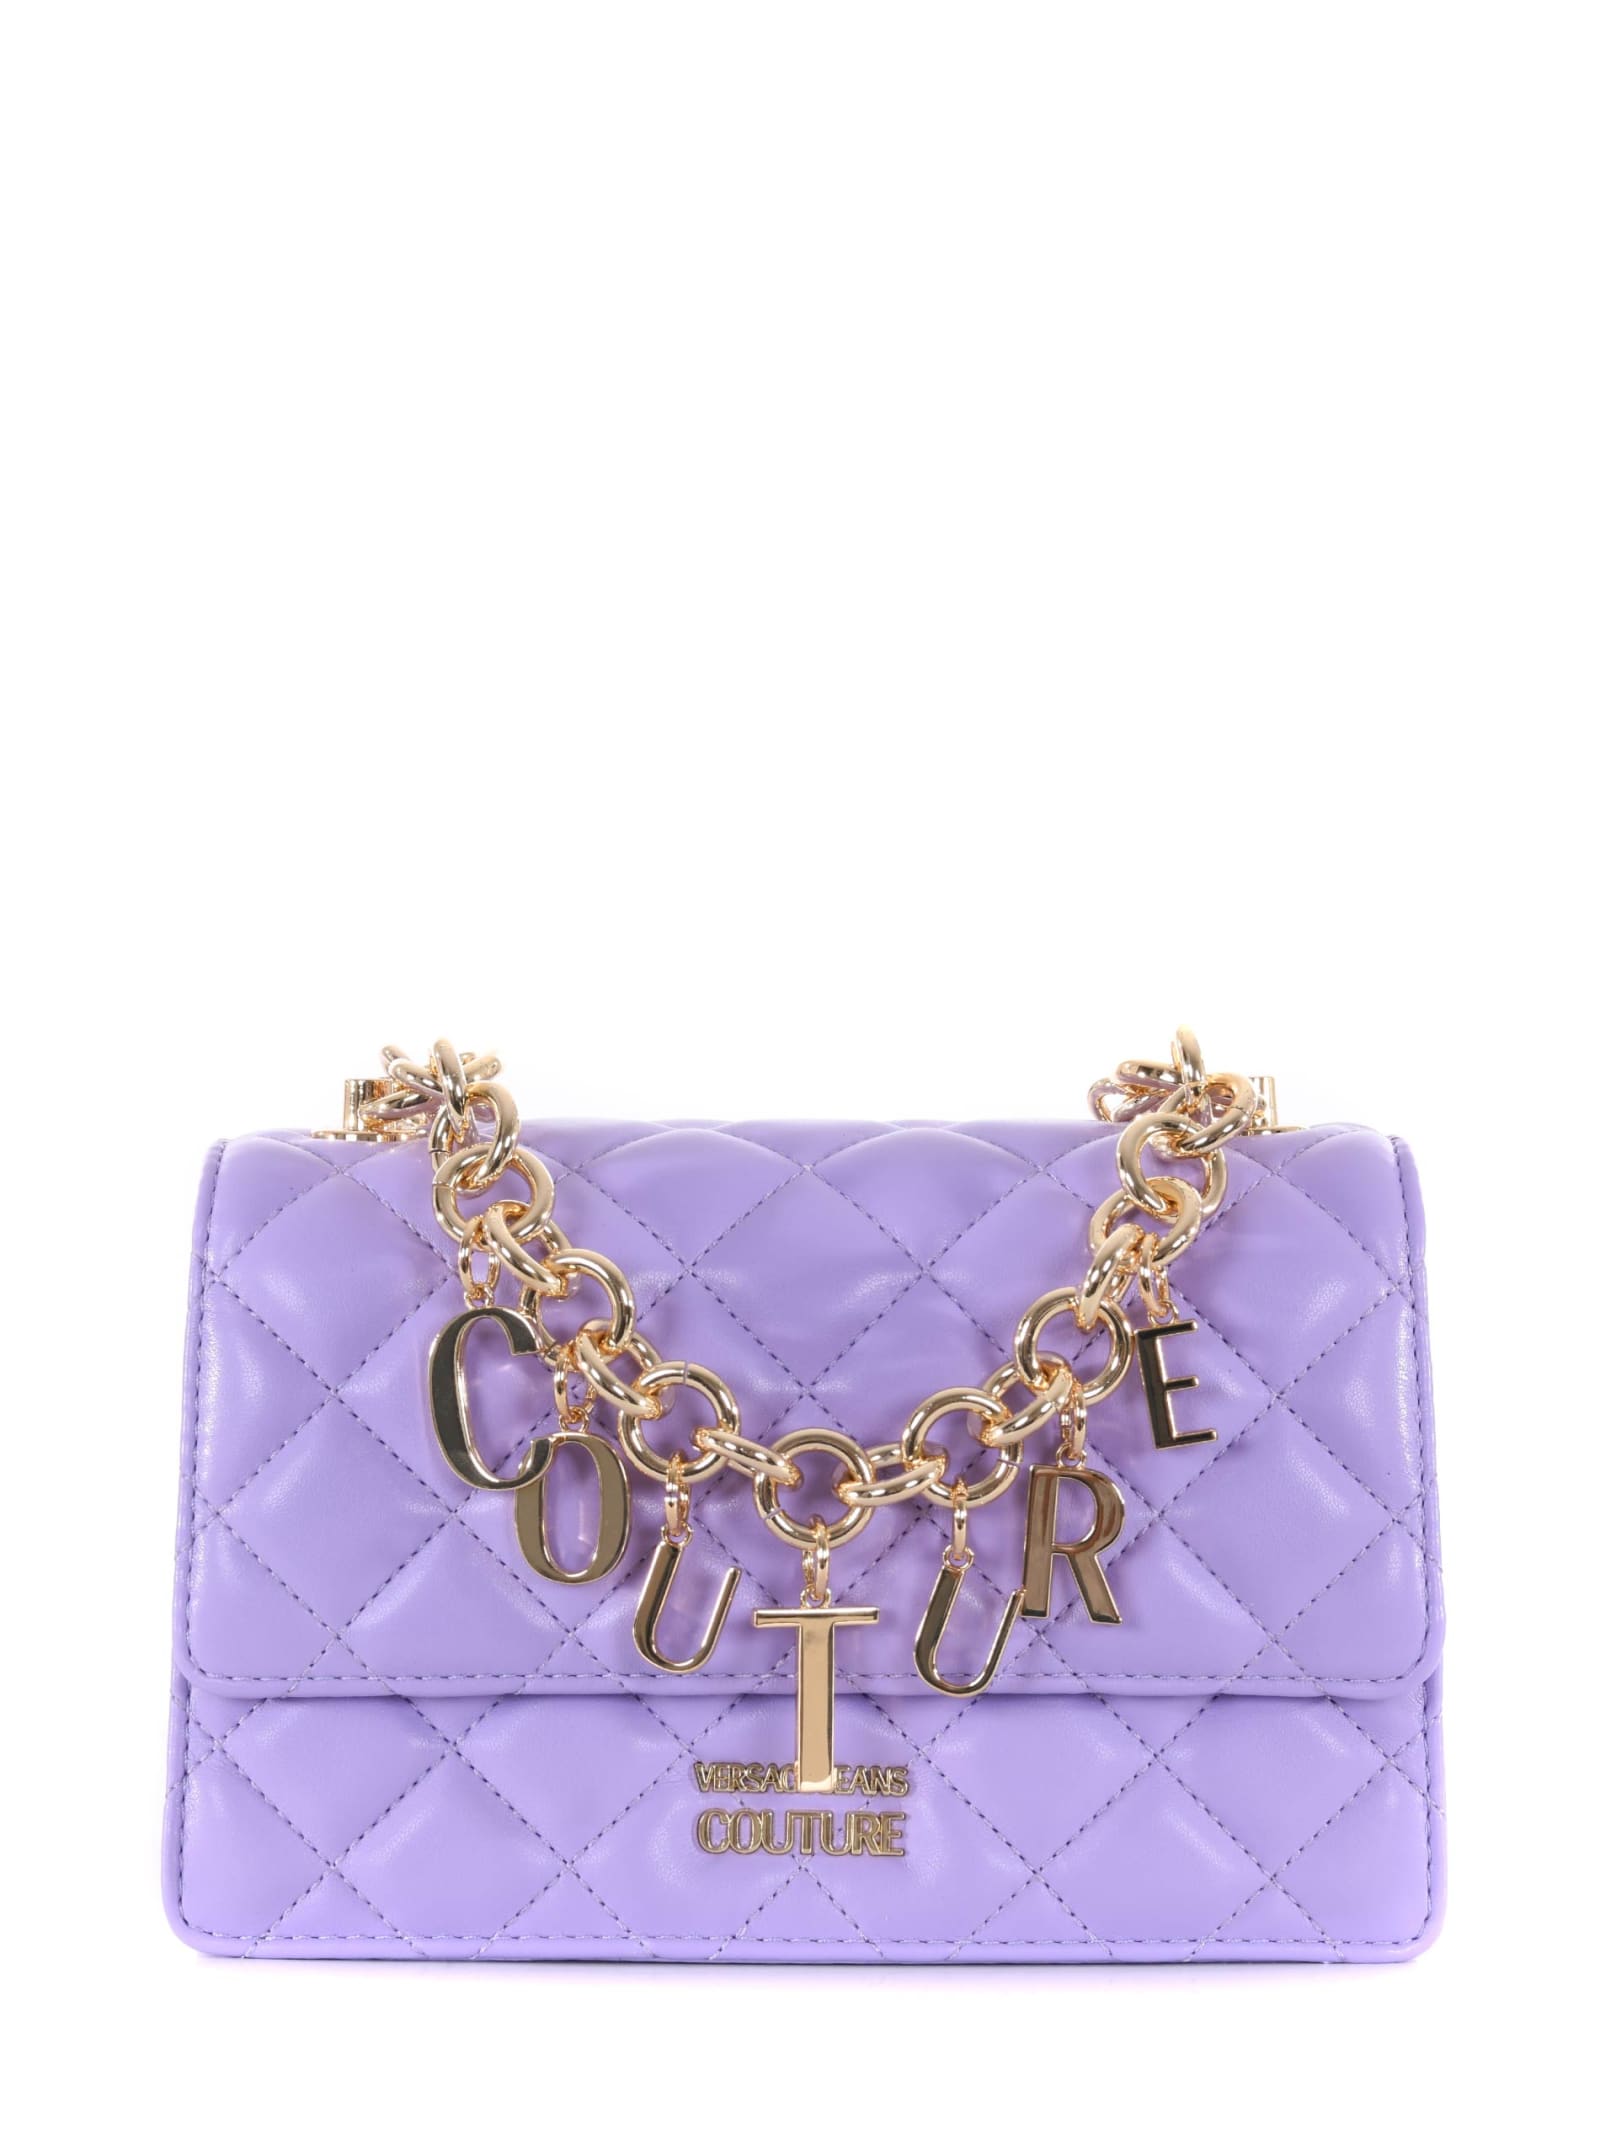 Versace Jeans Couture Quilted Eco-leather Handbag